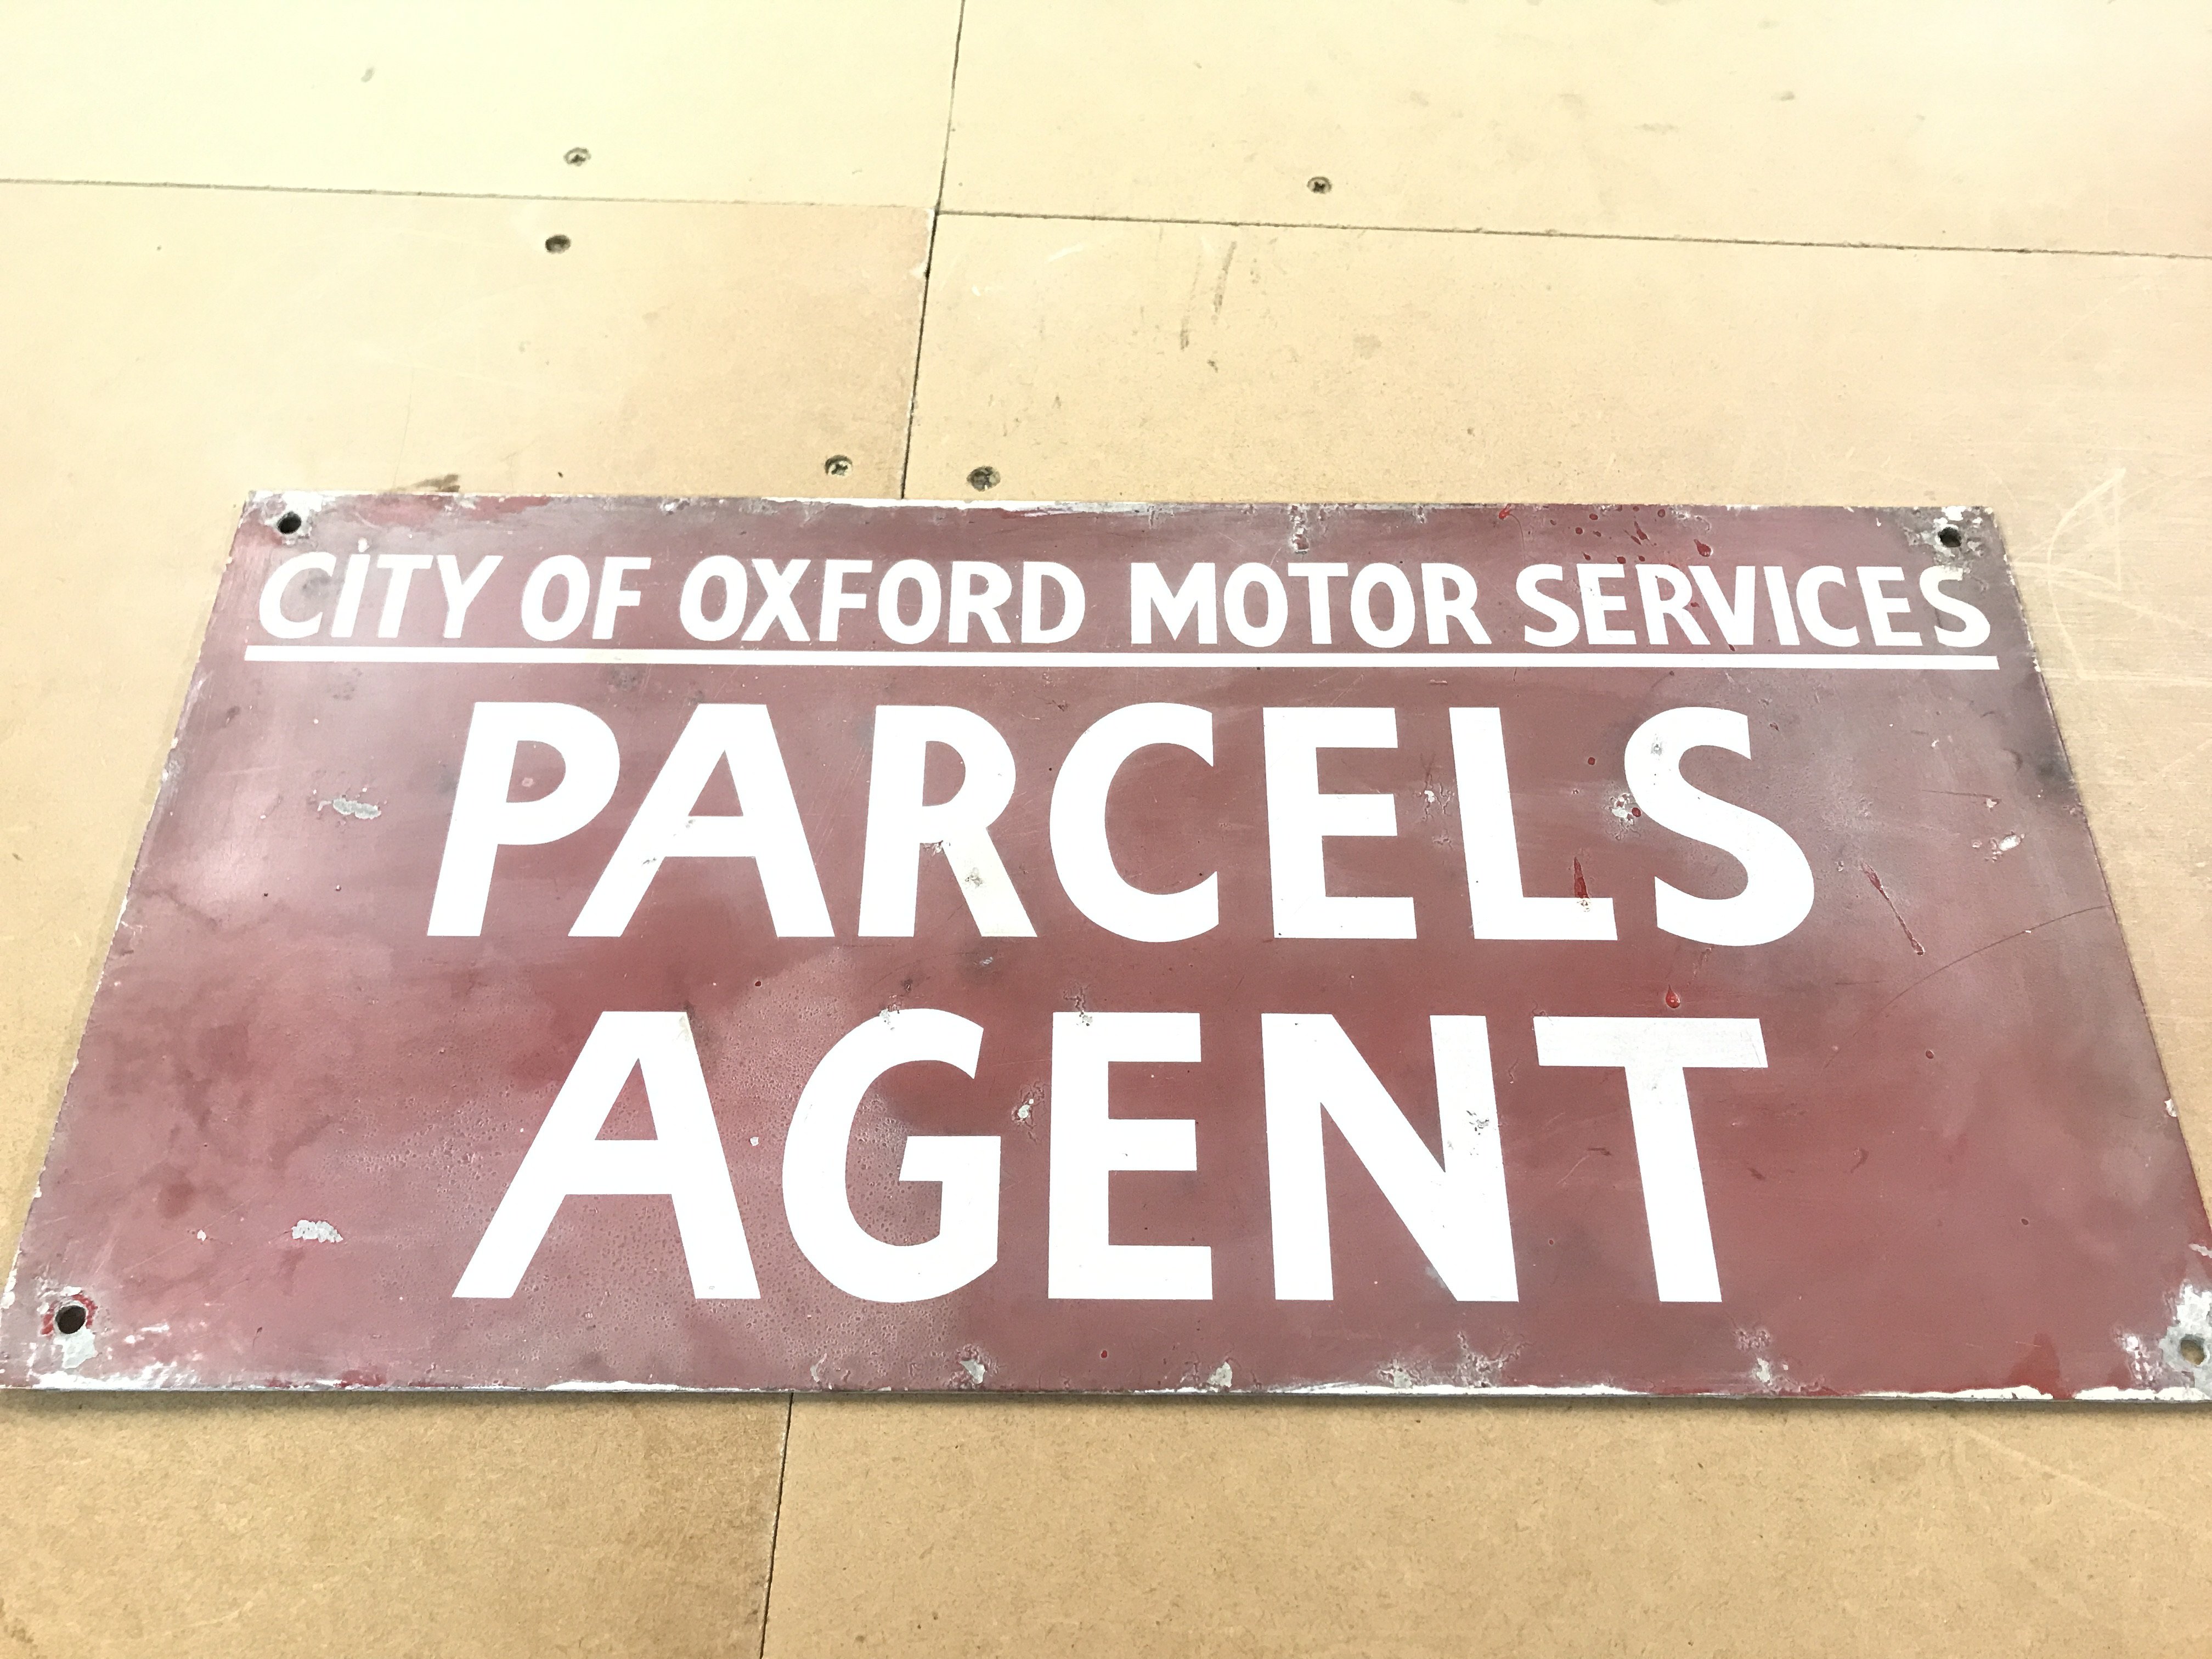 A rare sign for City of Oxford motor services Parc